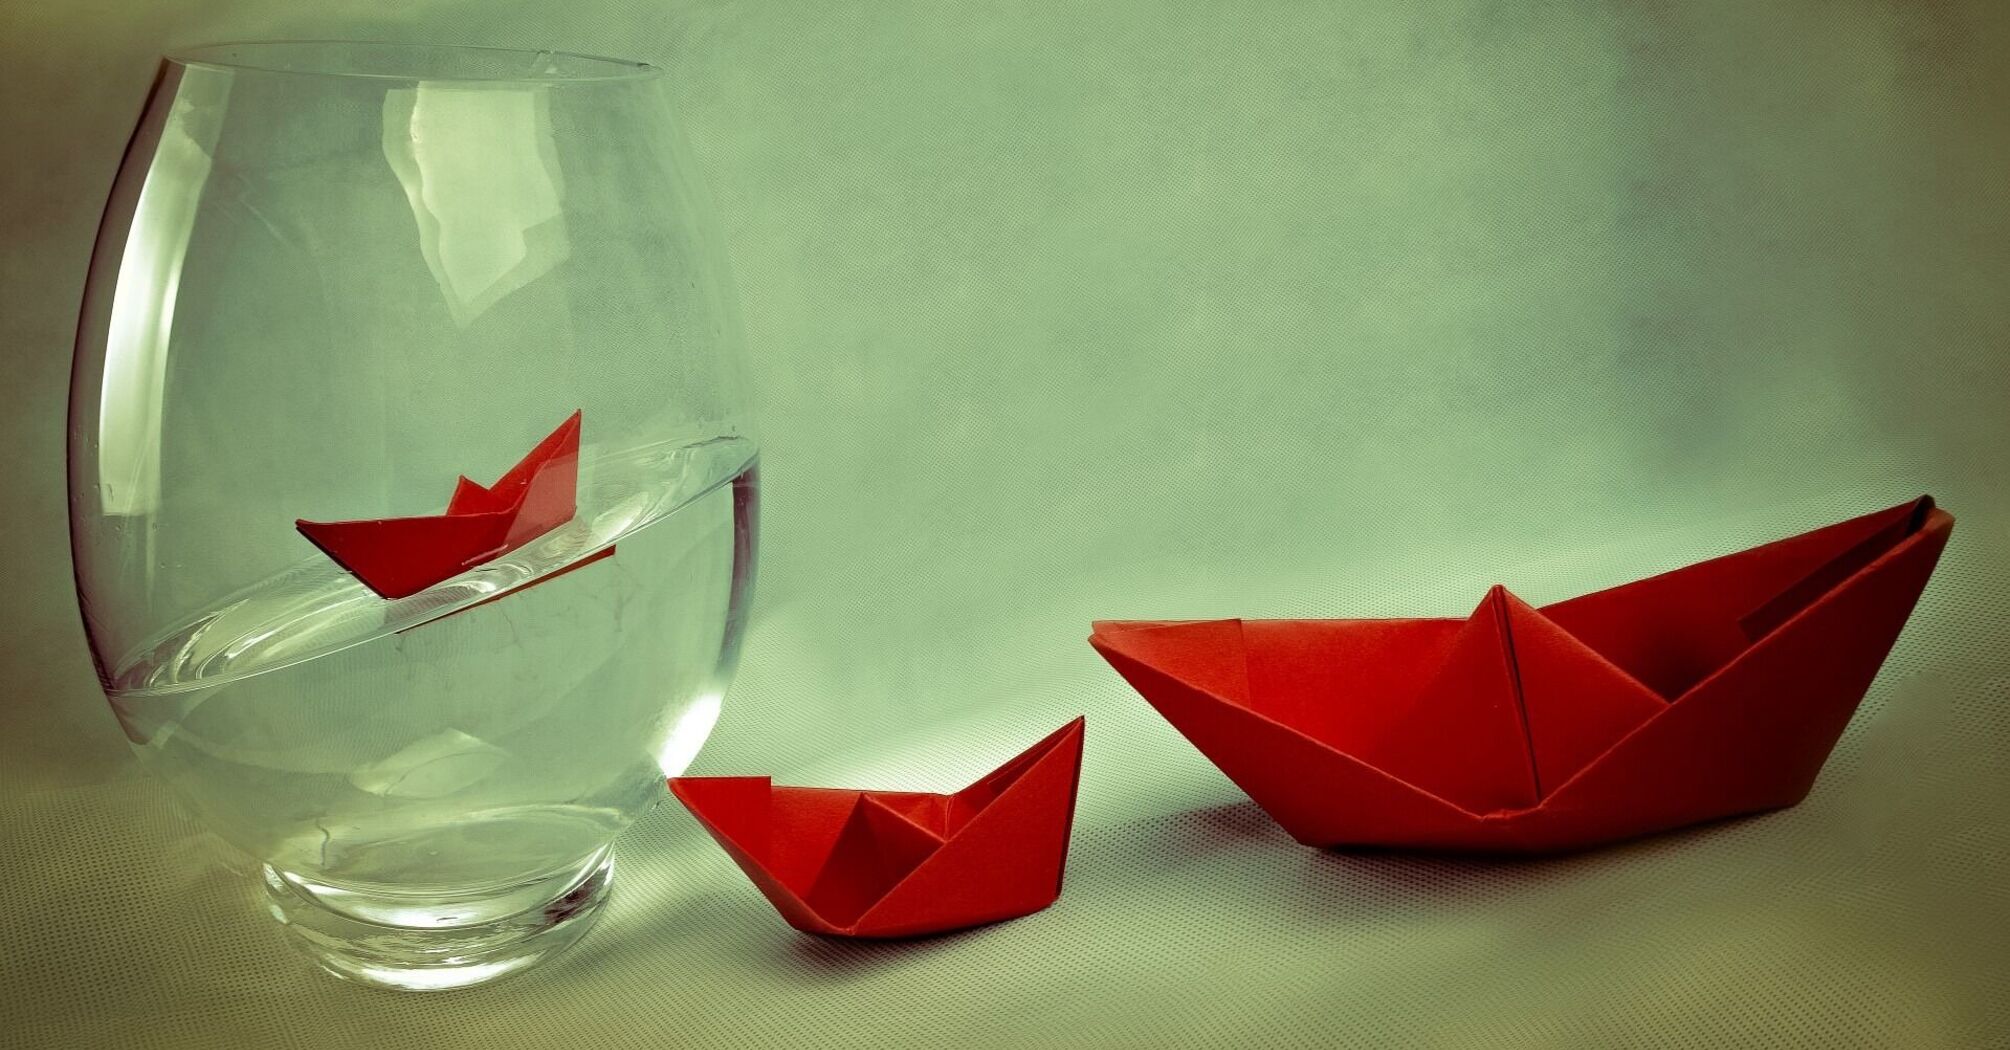 A red paper boat inside a large glass vase half-filled with water, with another red paper boat lying outside the vase on a beige surface